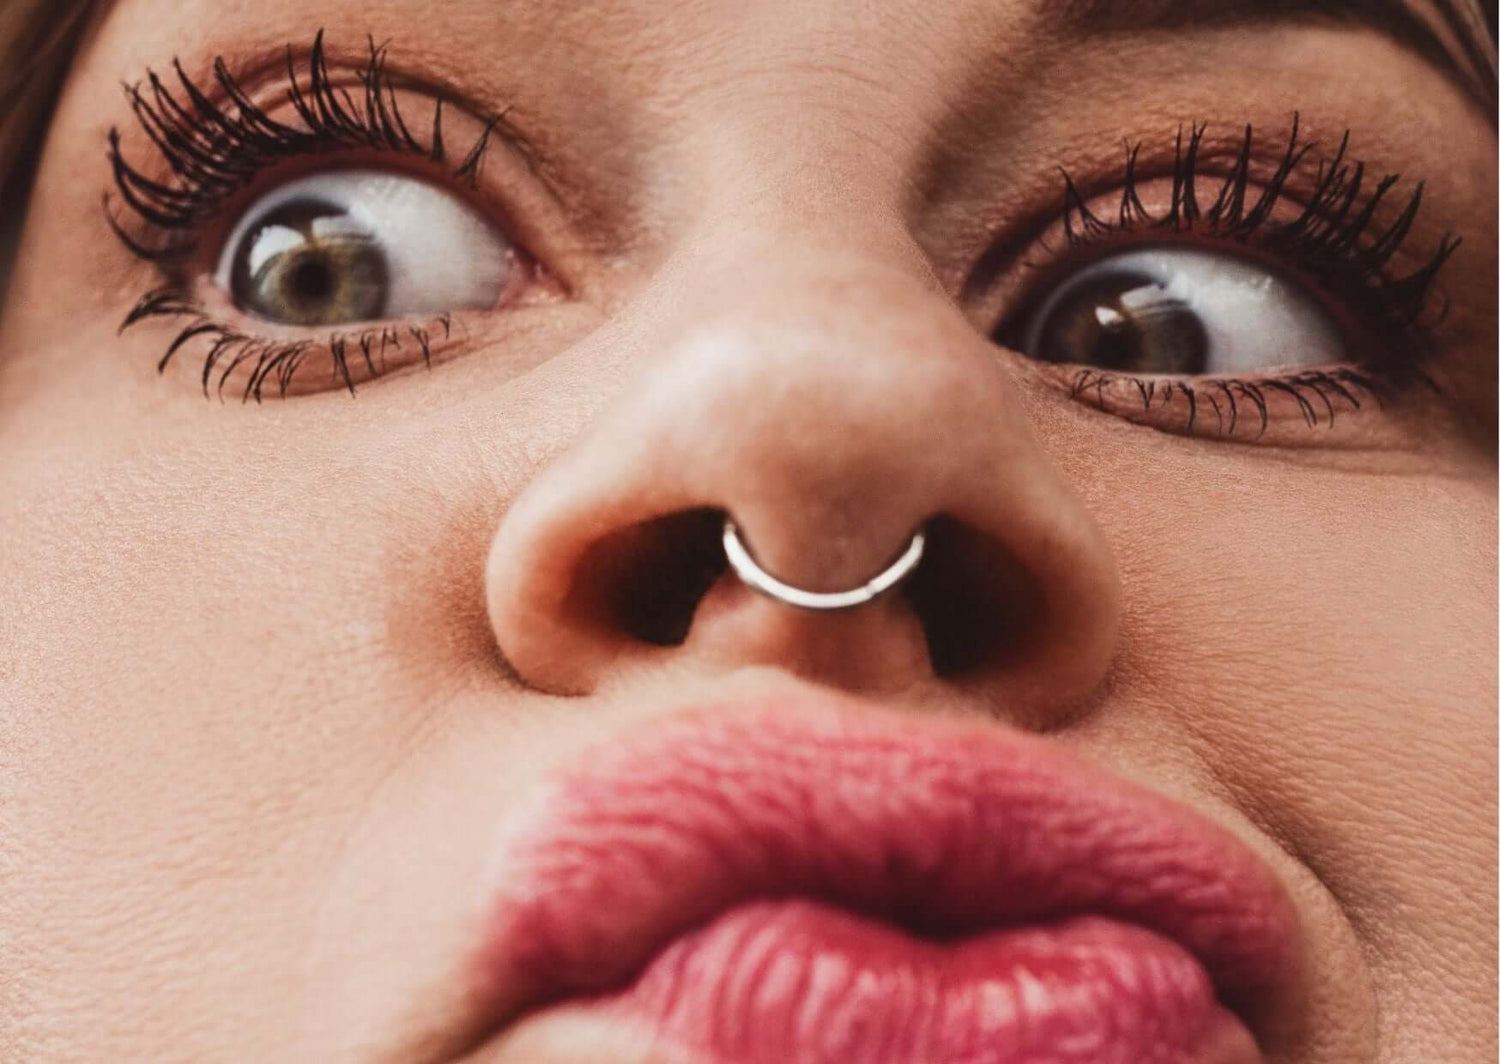 What You Need to Know About Septum Piercings - Dr. Piercing Aftercare